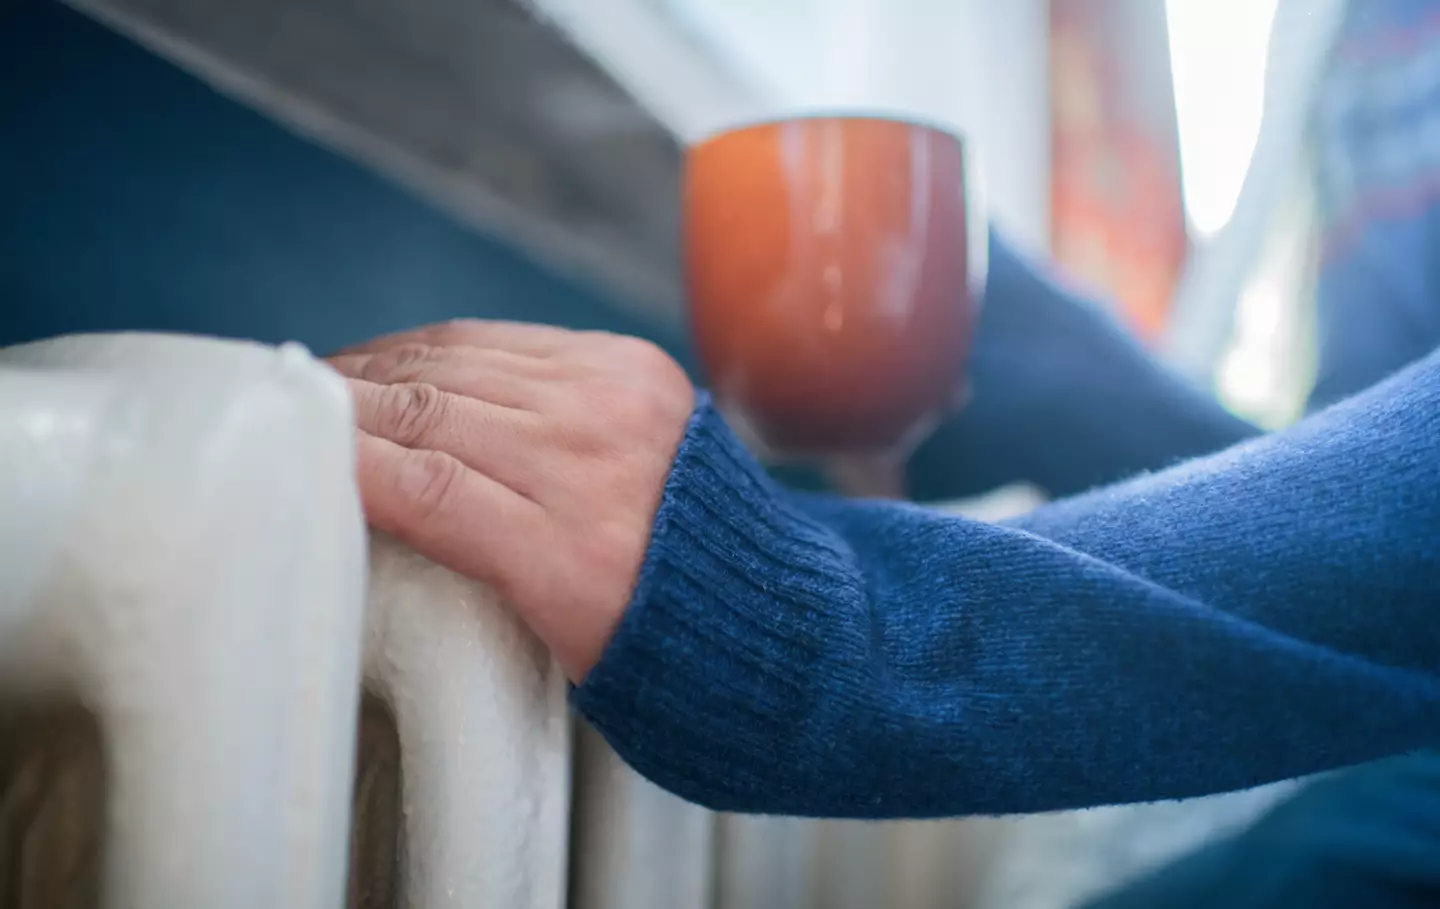 Cold hands can be a sign of Raynaud's.